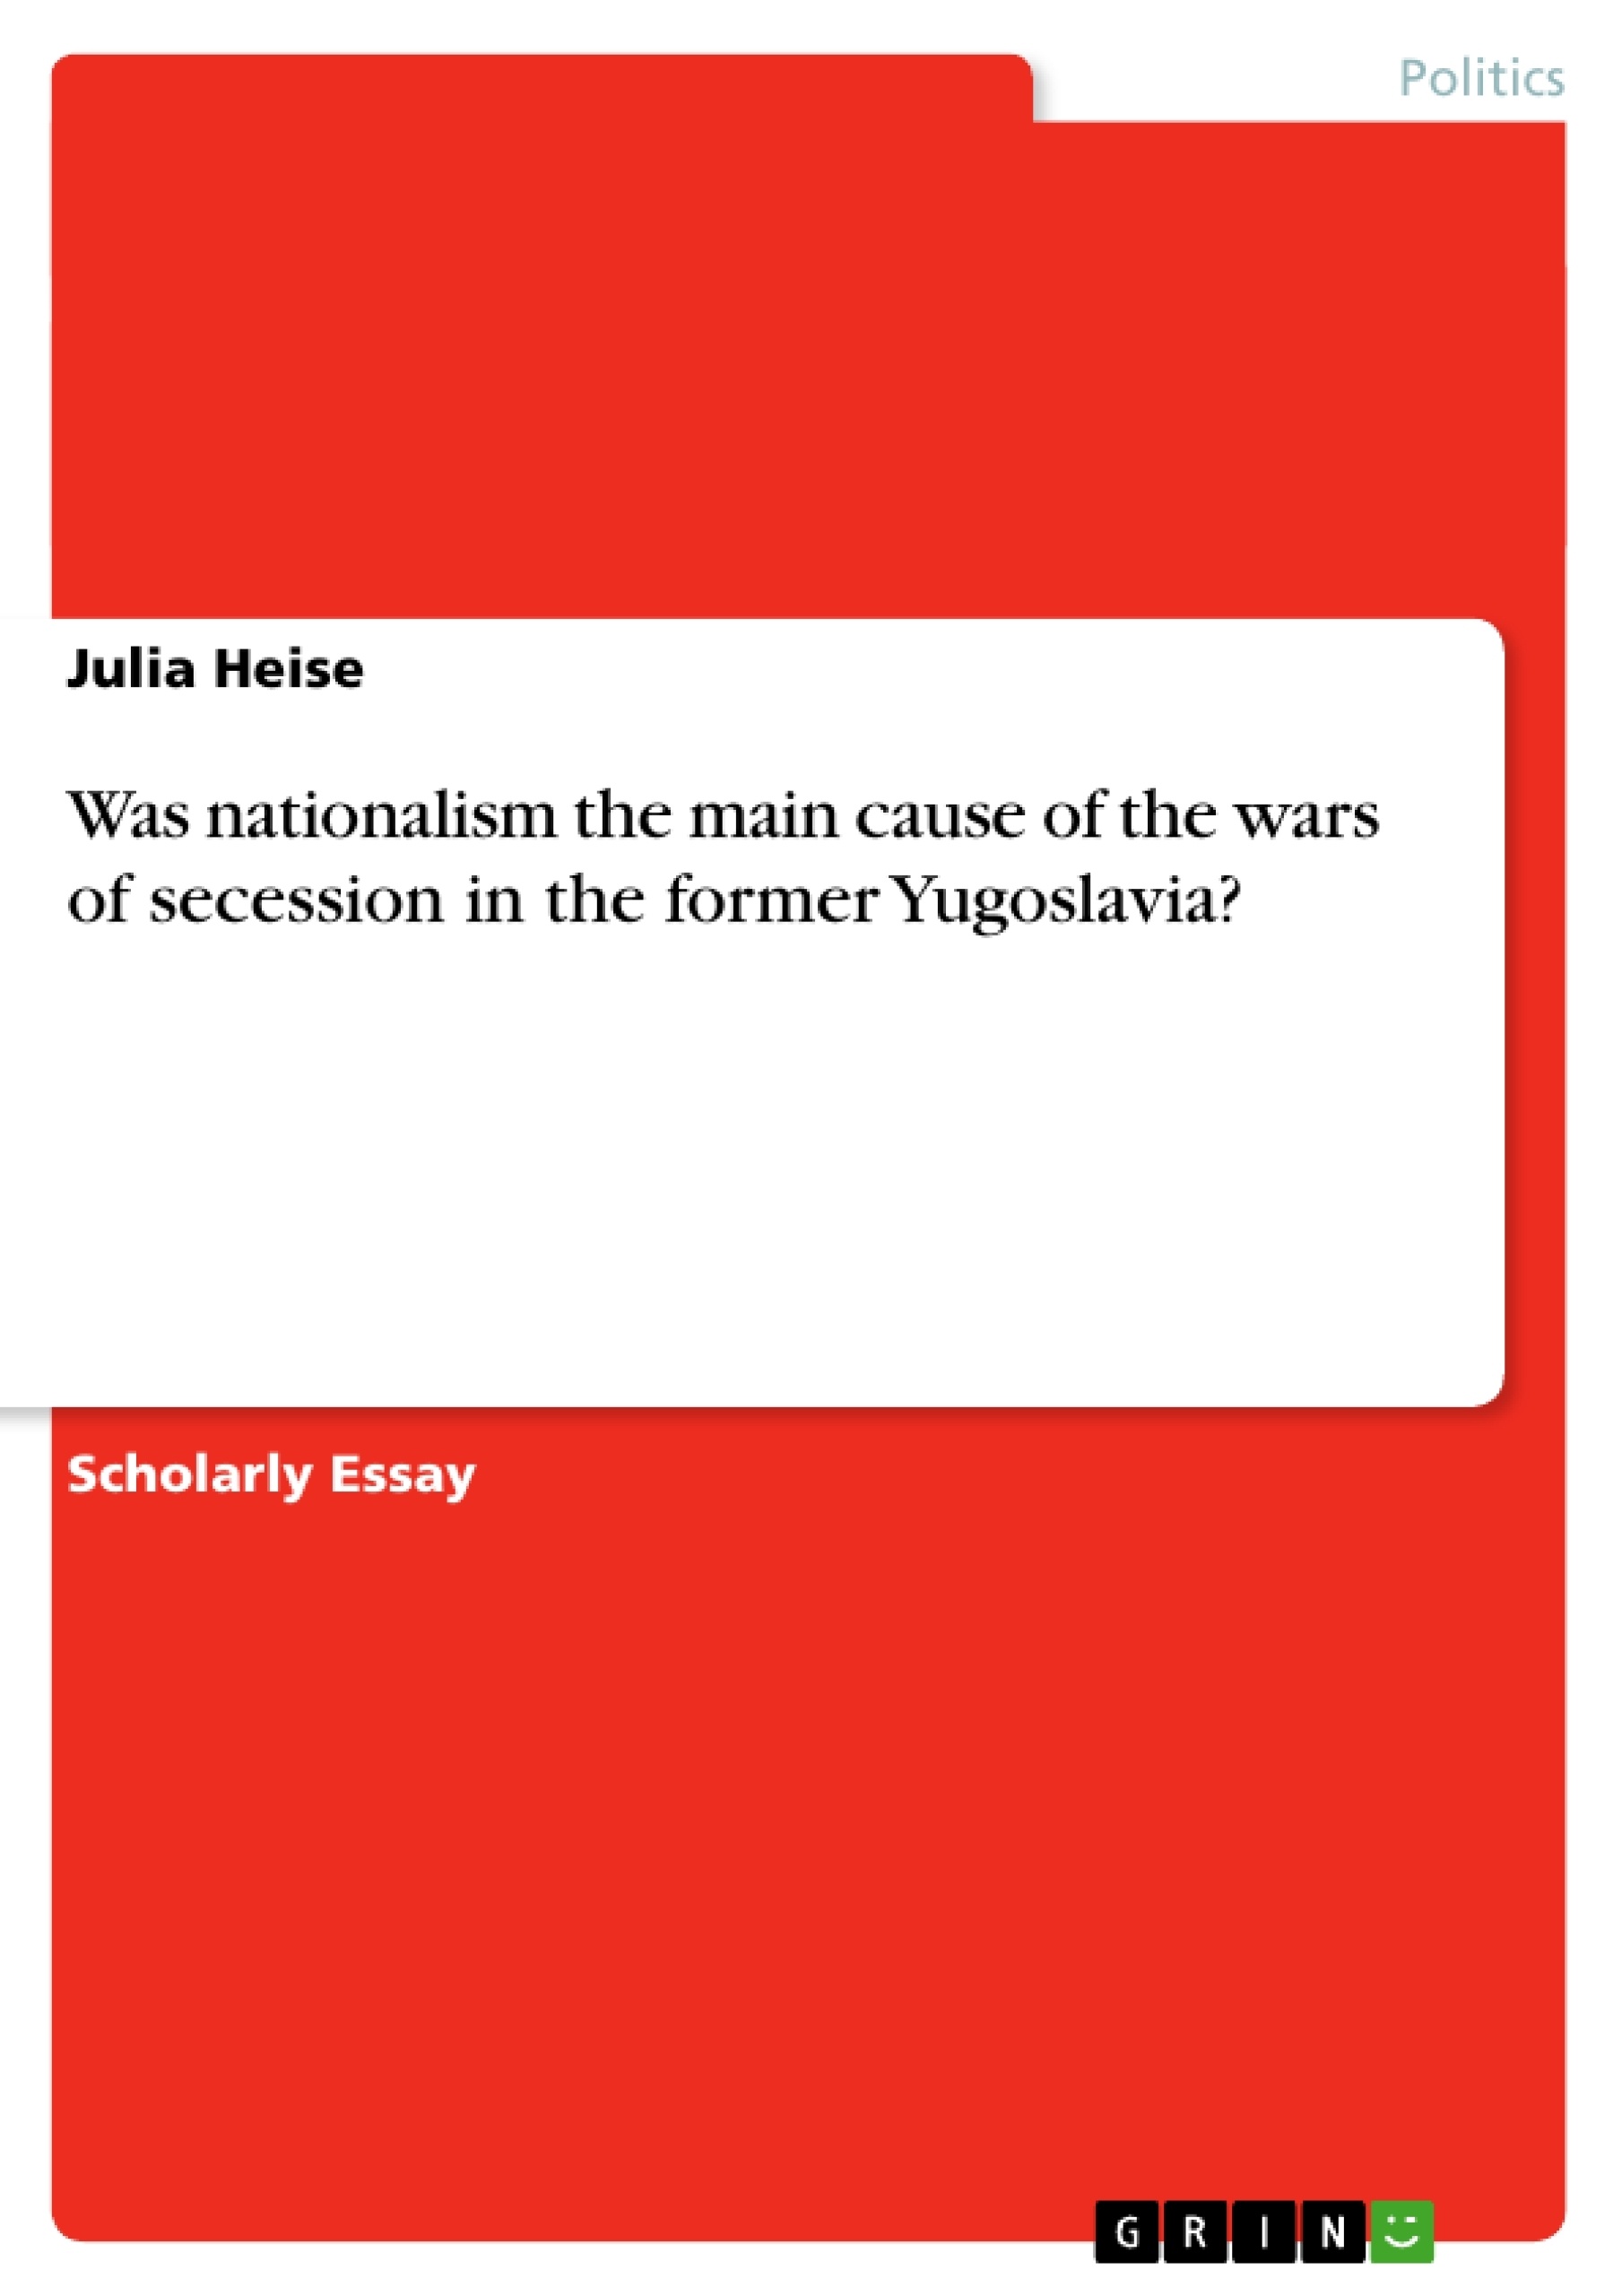 Título: Was nationalism the main cause of the wars of secession in the former Yugoslavia?